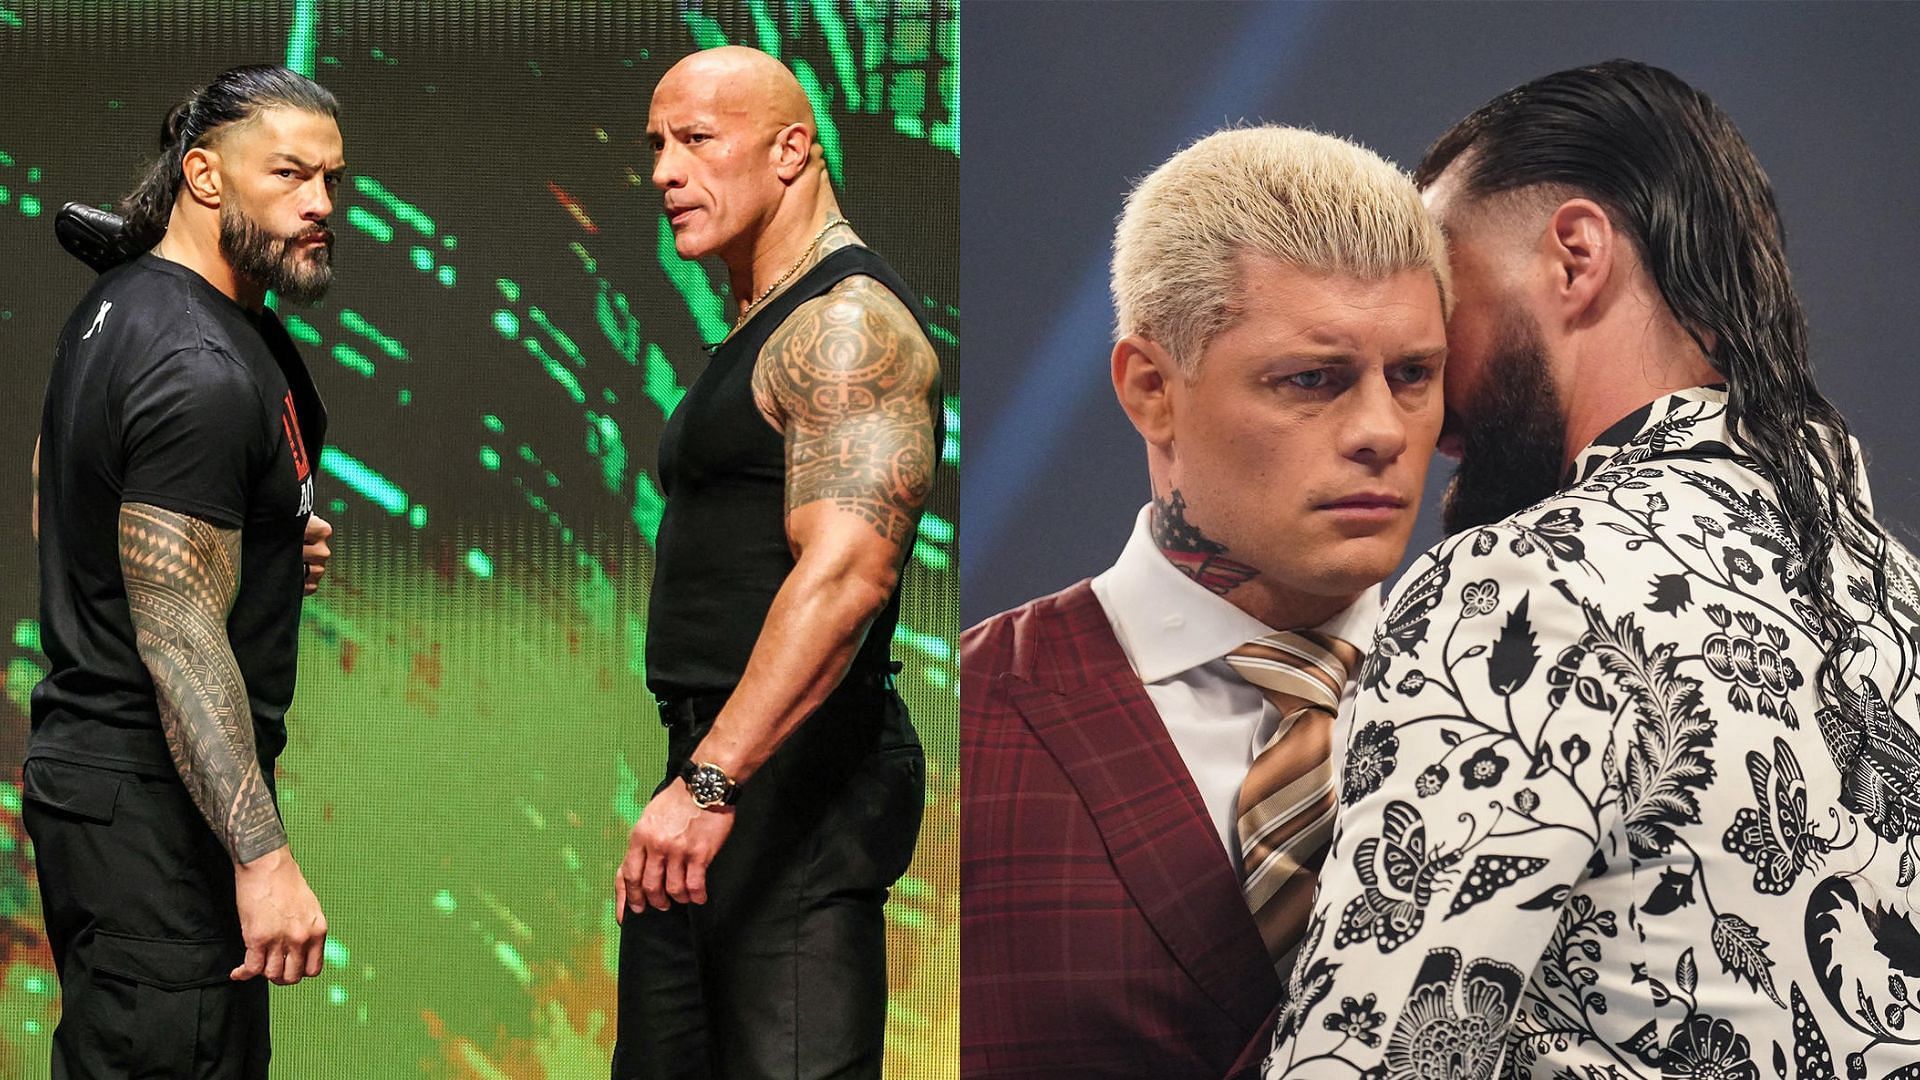 The Rock, Roman Reigns, Cody Rhodes, and Seth Rollins were at the Kickoff event!